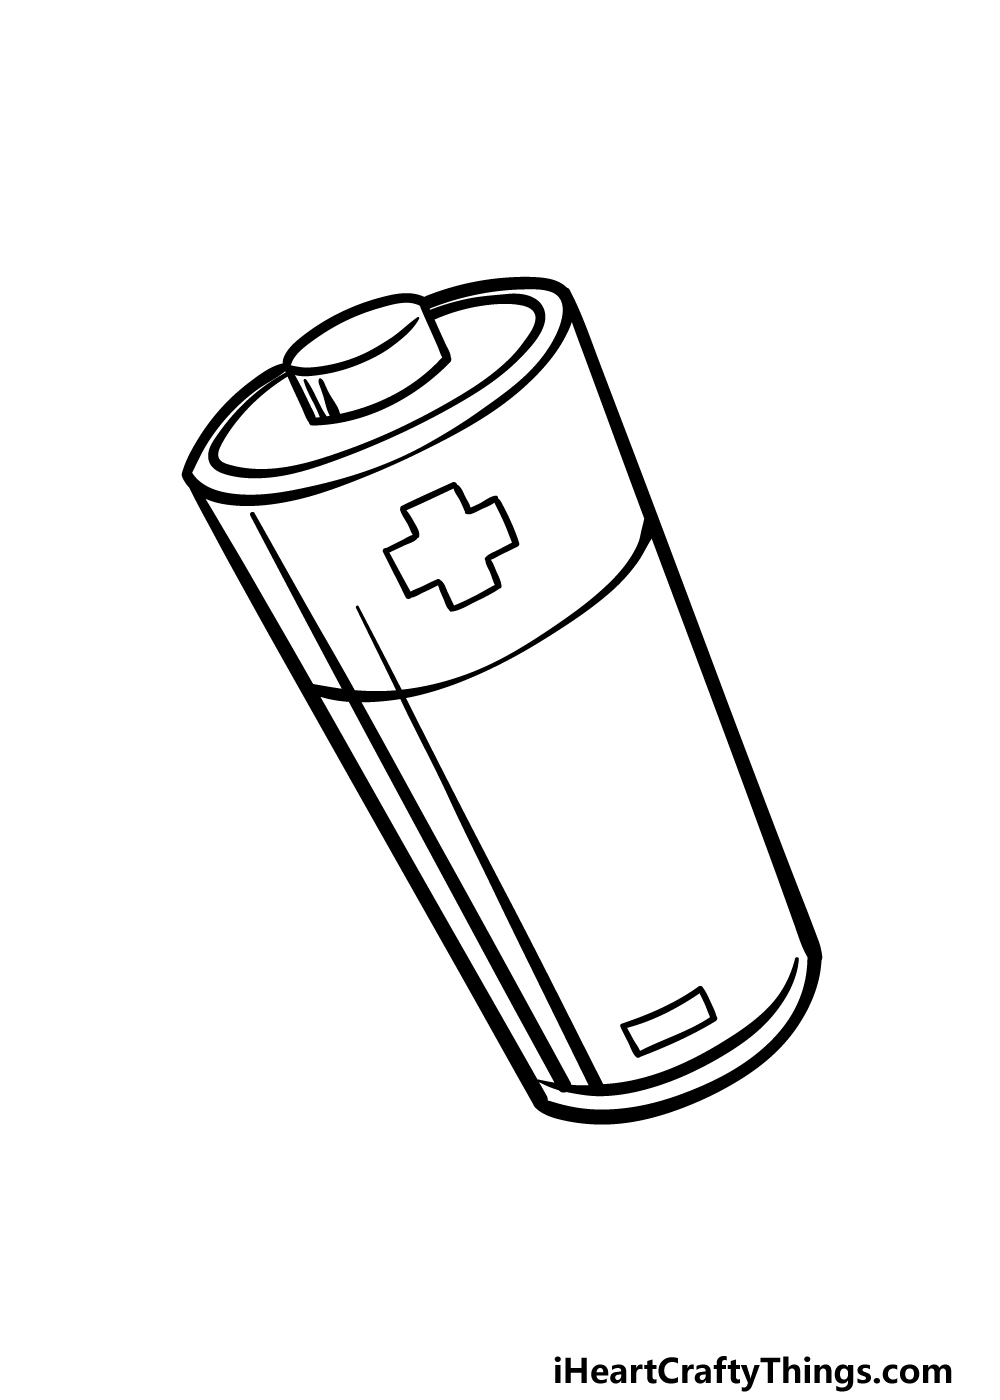 Battery Drawing - How To Draw A Battery Step By Step